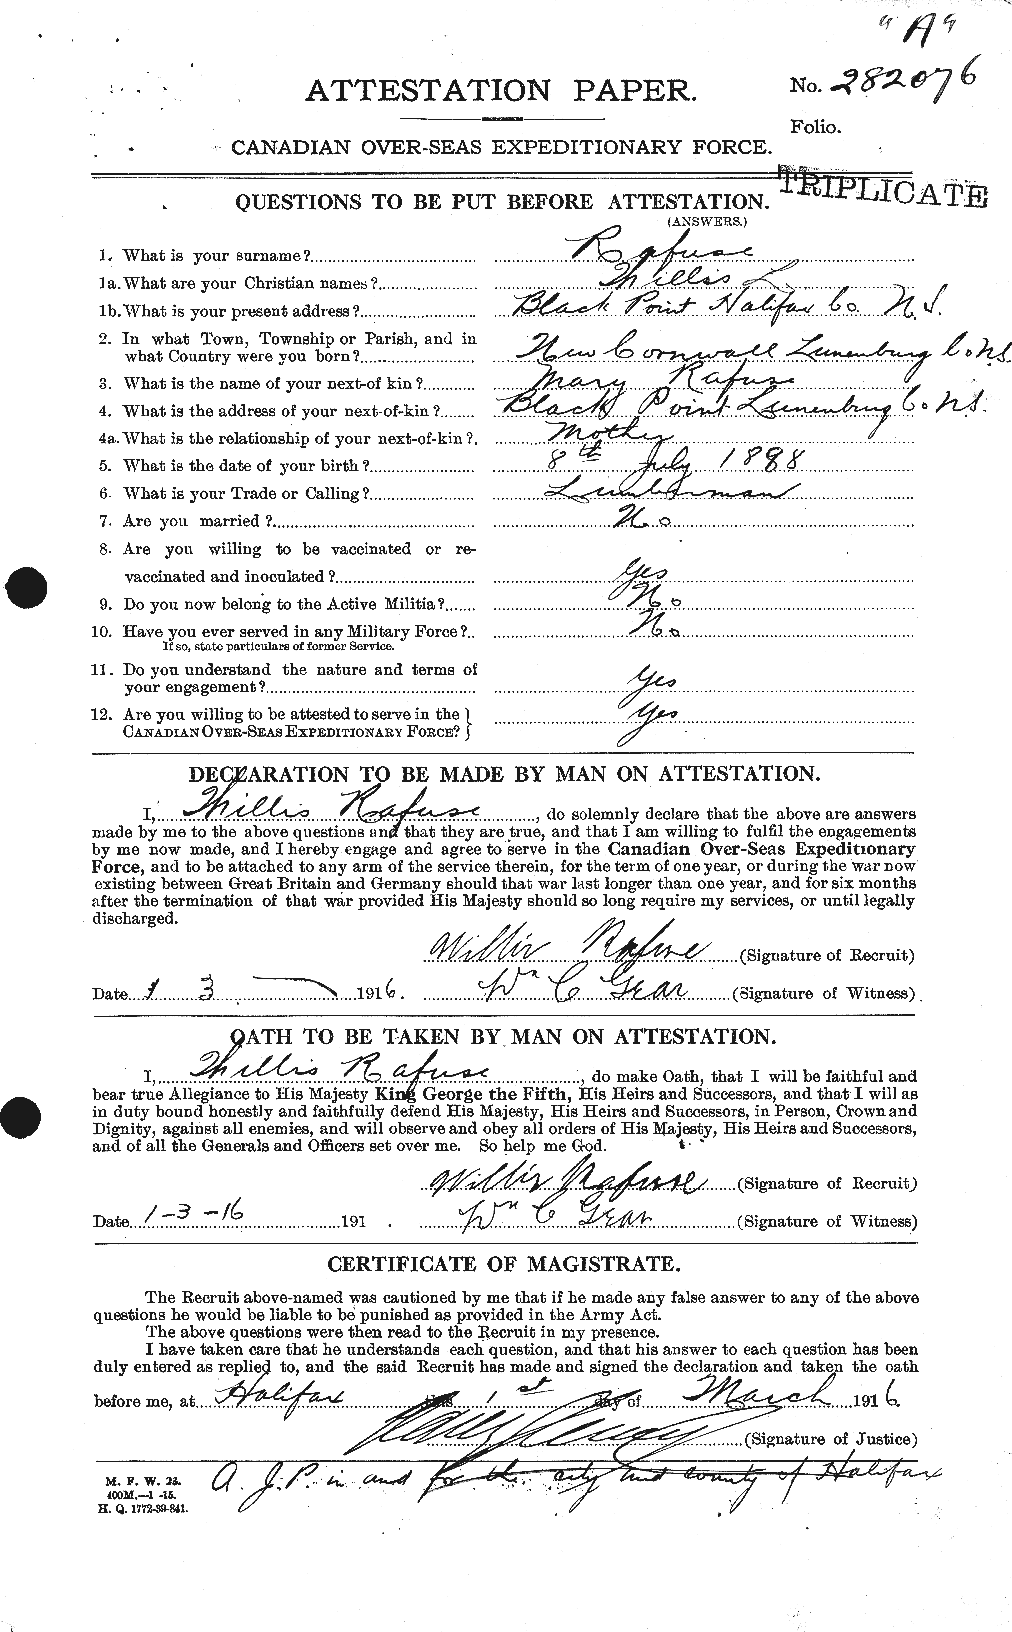 Personnel Records of the First World War - CEF 593078a